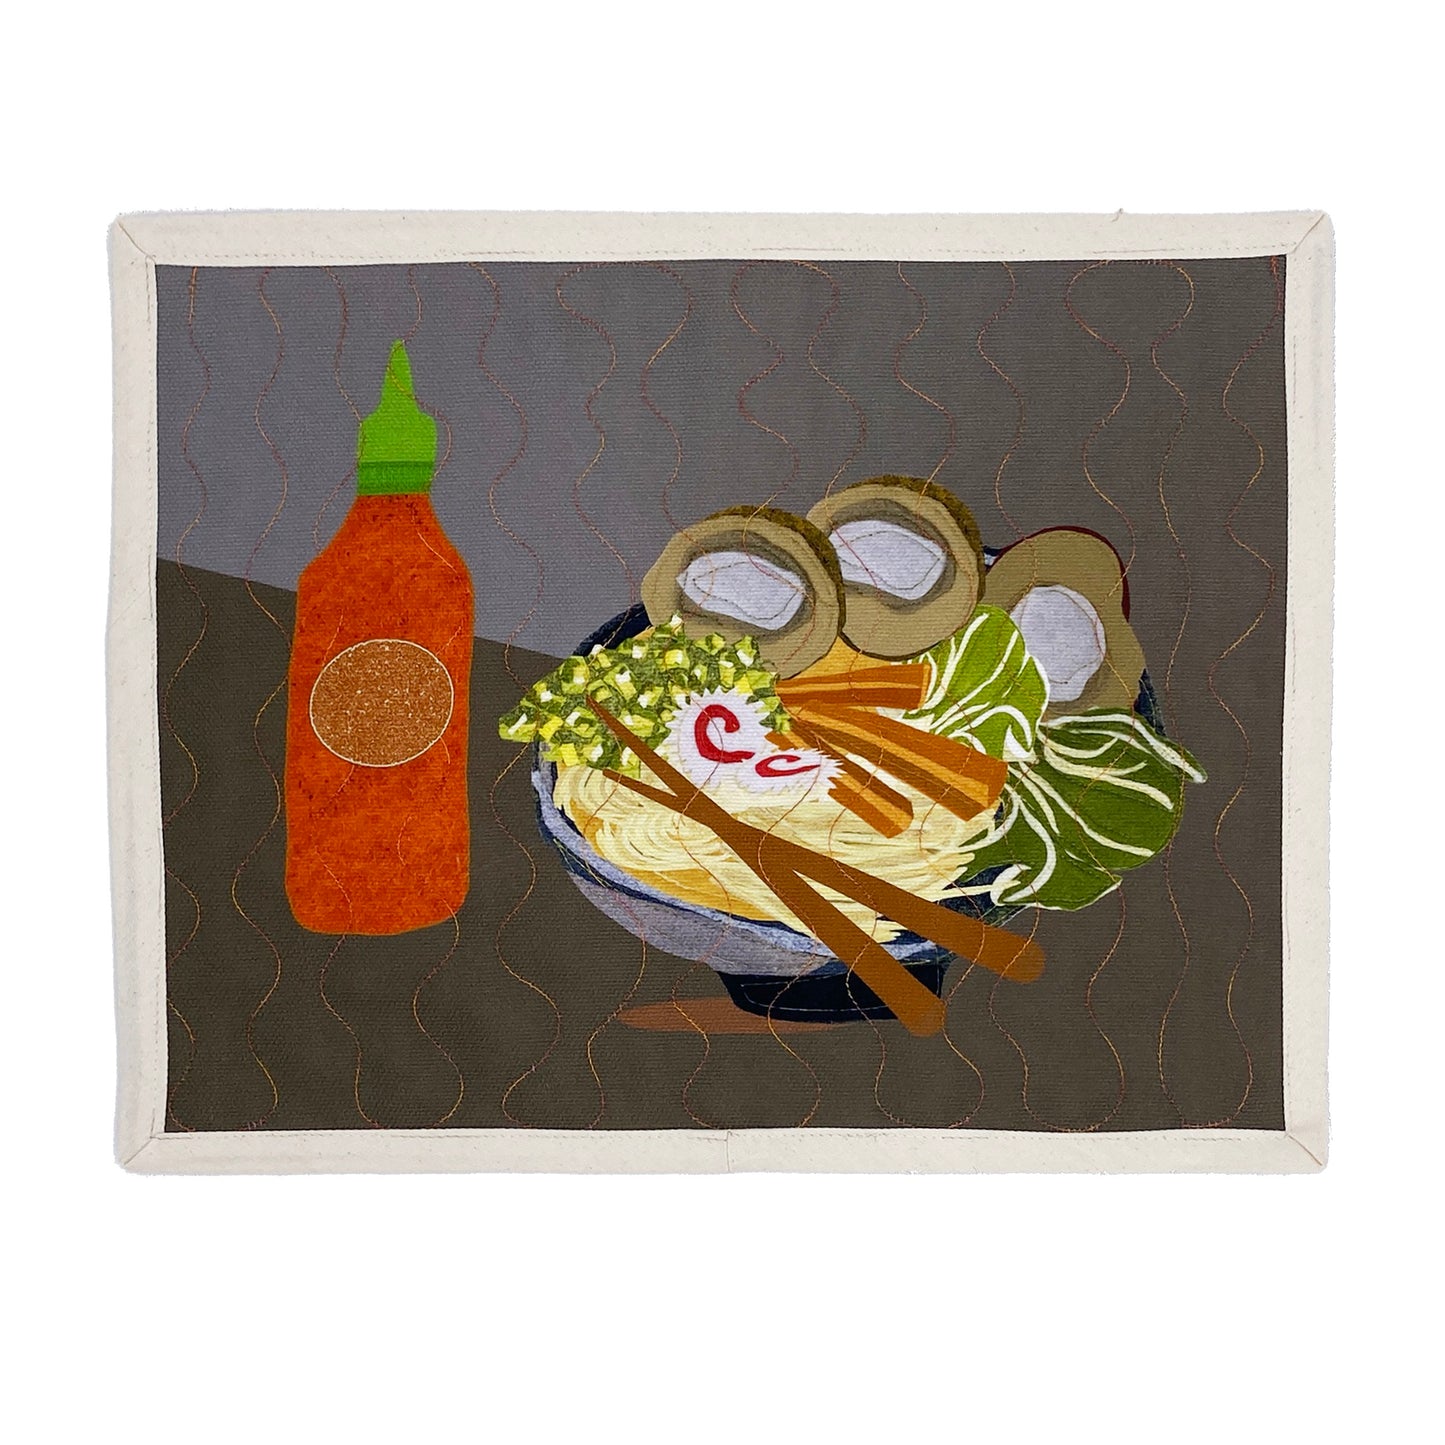 Ramen placemat by Quirky Digs -- printed and topstitched poly canvas placemat 